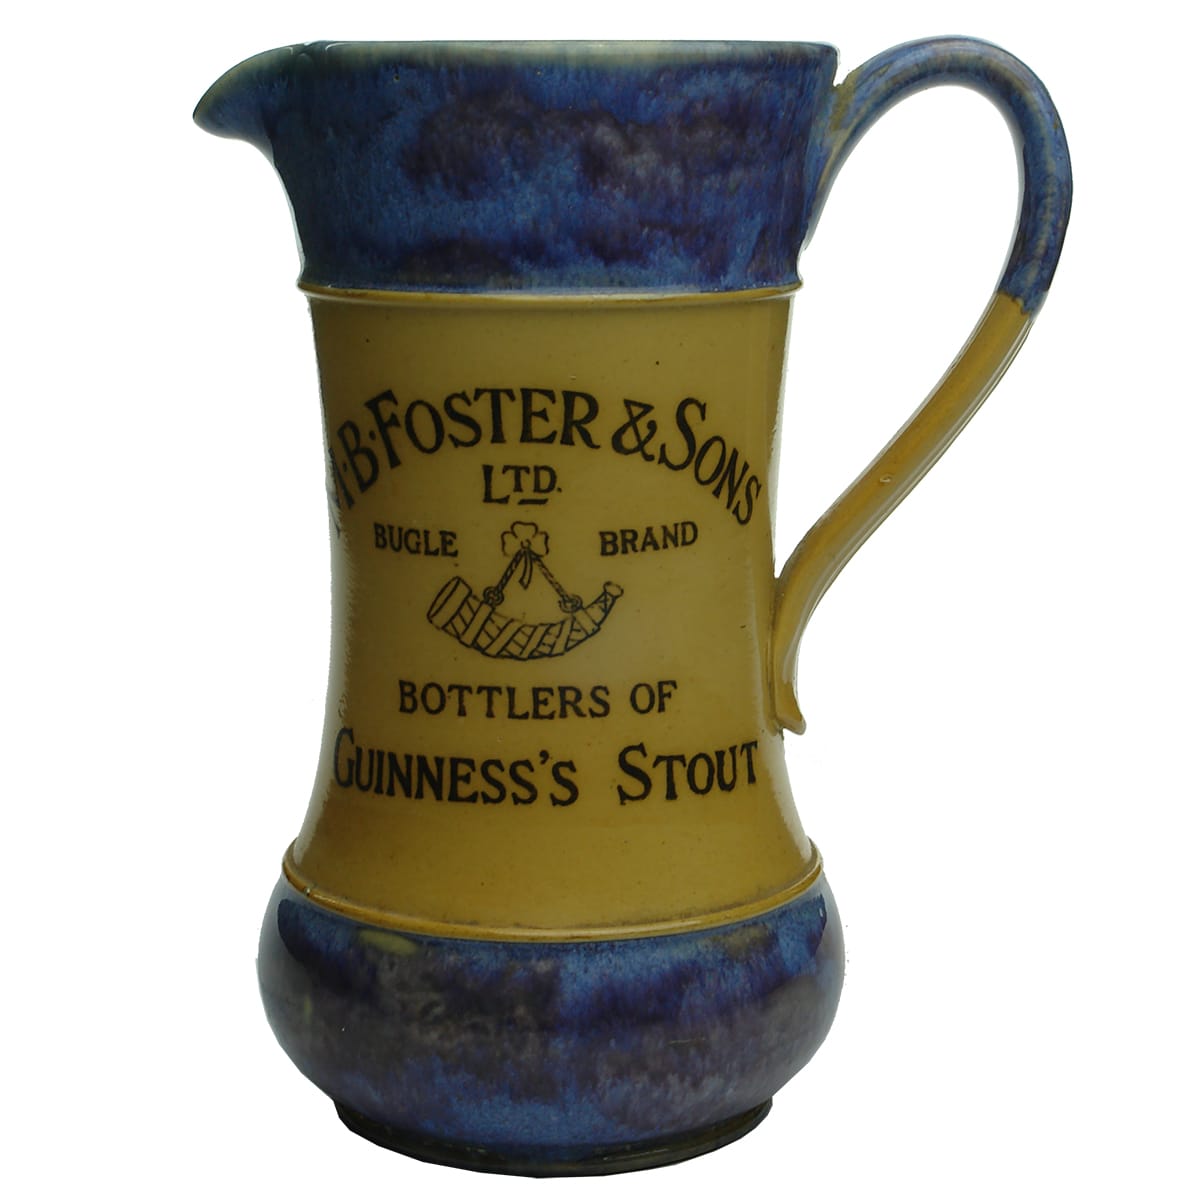 Water Jug. M. B. Foster & Sons Ltd. Bugle Brand. Bottlers of Guinness's Stout & Bass's Ale. Royal Doulton.